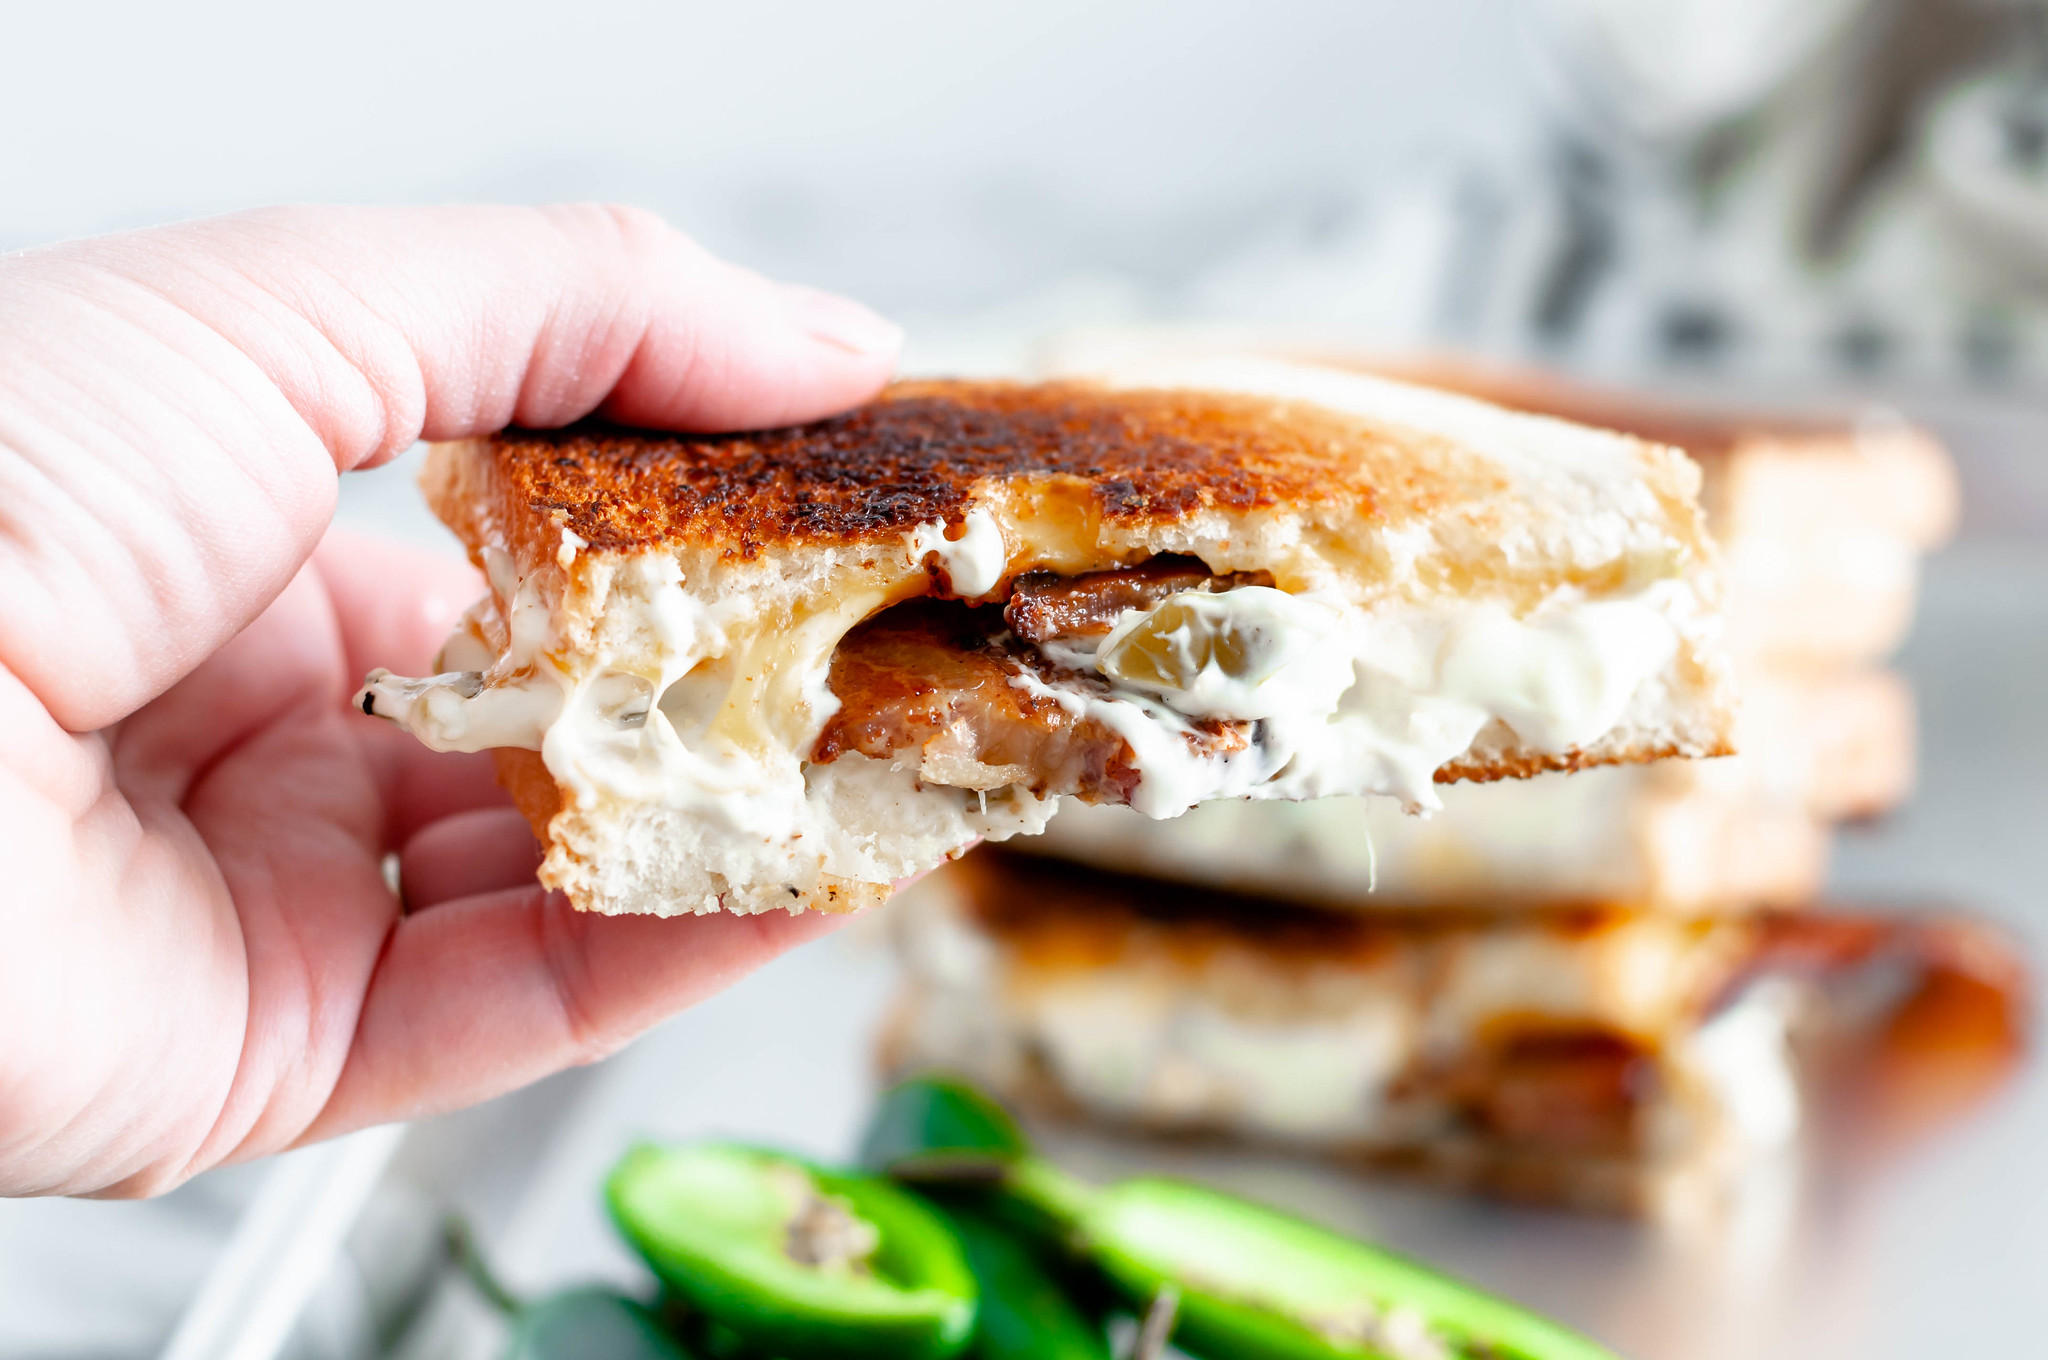 Meet your new favorite sandwich, the Jalapeno Grilled Cheese. Jalapeno jelly, cream cheese, pickled jalapenos, sharp cheddar and bacon combine to make the most glorious sandwich around.